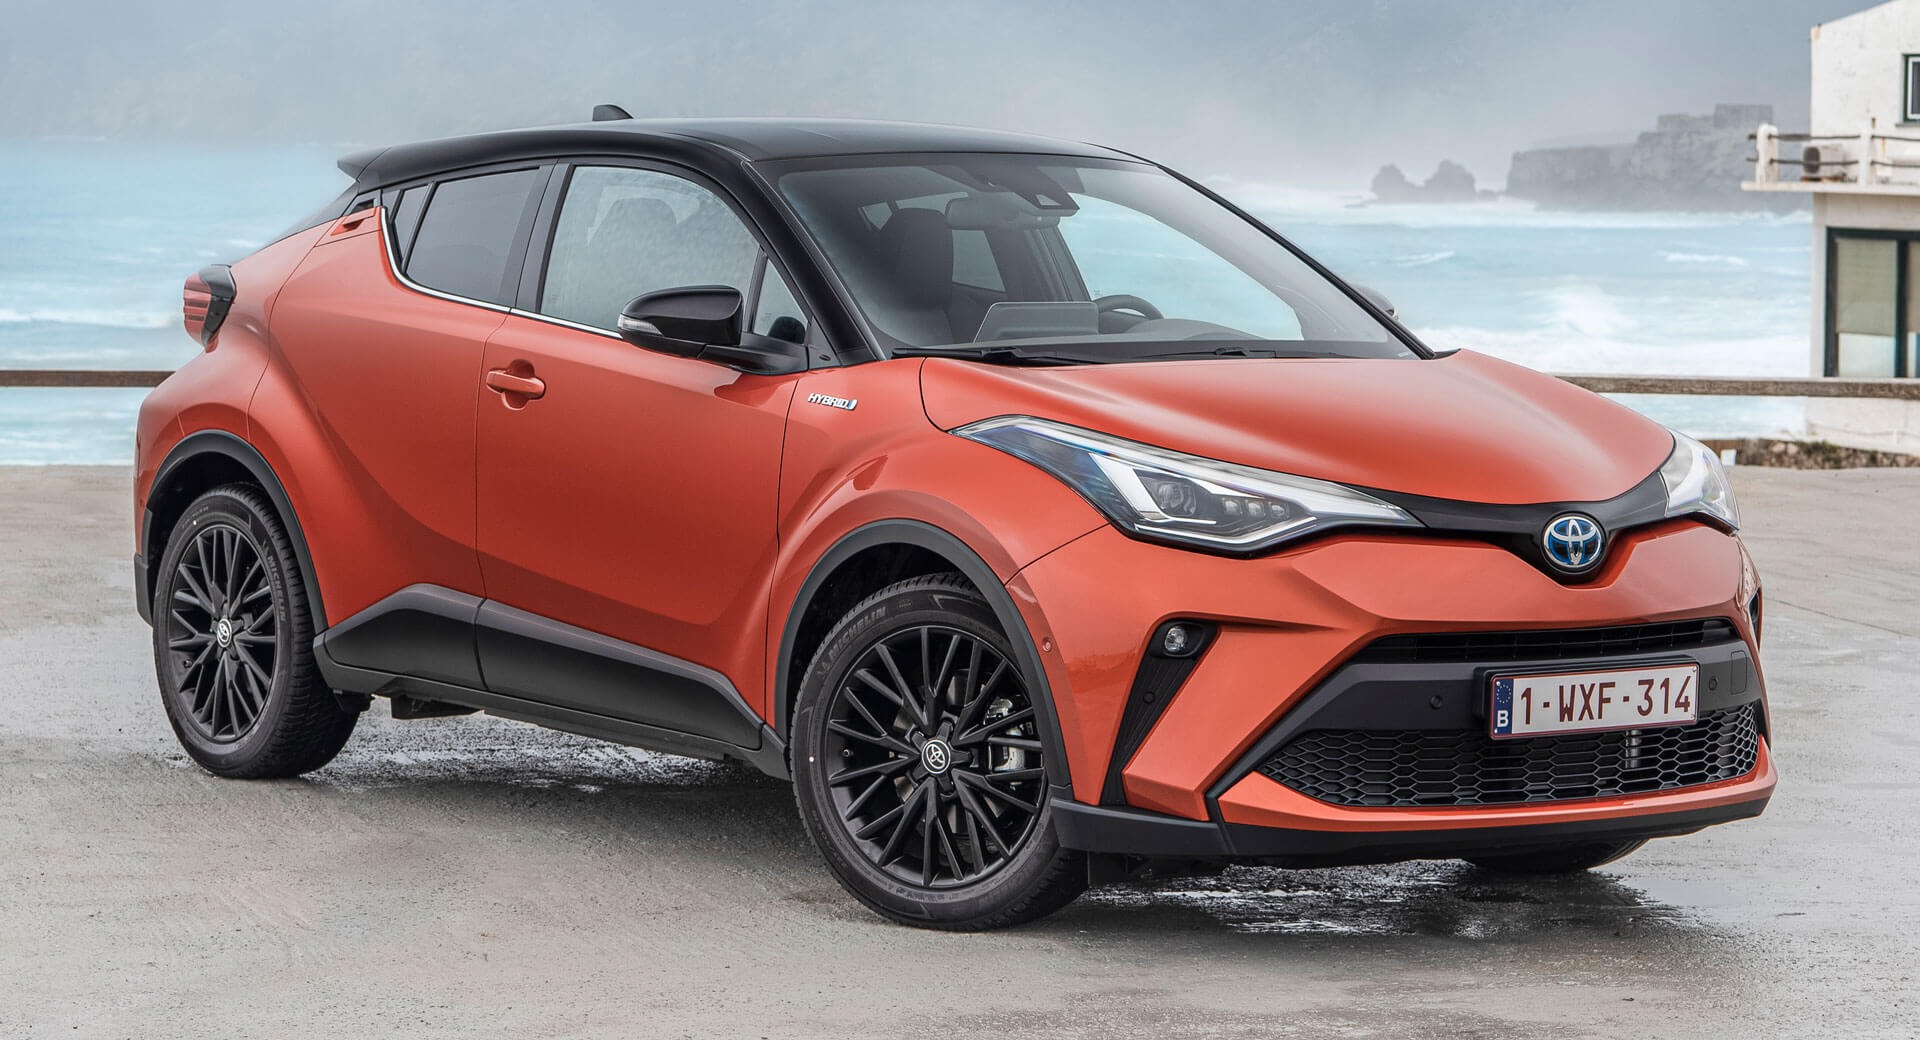 2020 Toyota C-HR Launched In The UK, Gets Limited-Run Orange Edition